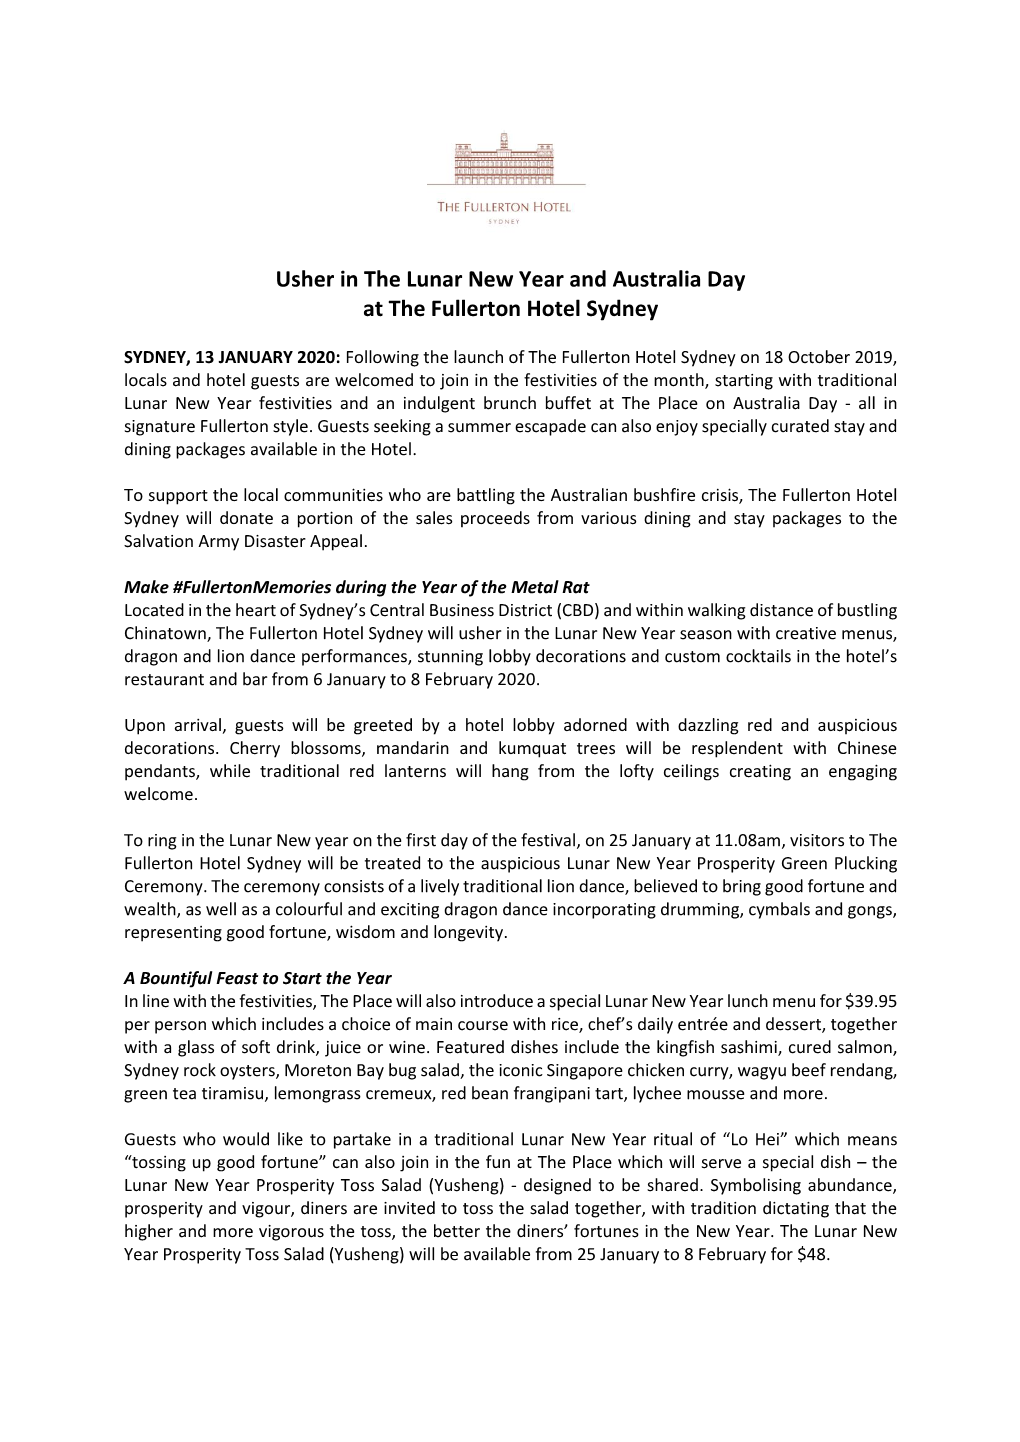 Usher in the Lunar New Year and Australia Day at the Fullerton Hotel Sydney